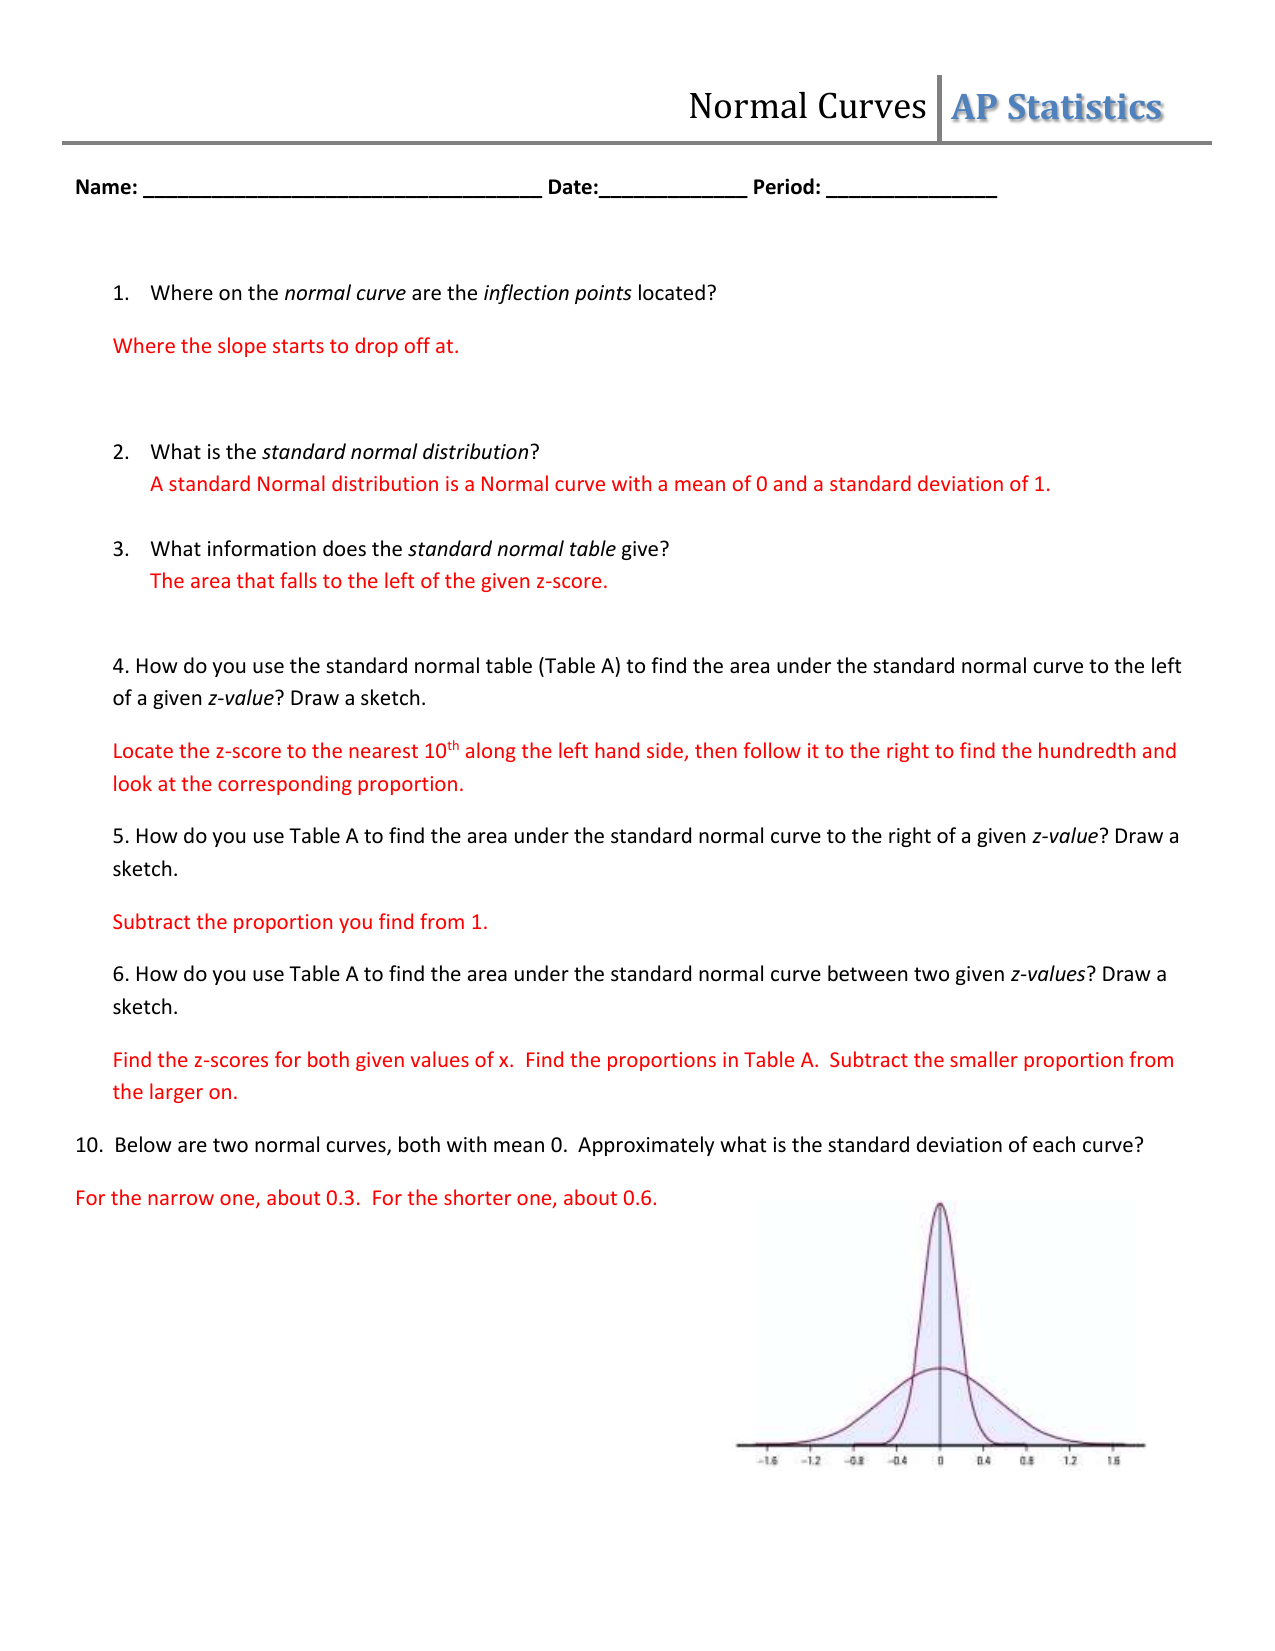 homework 2 normal distribution and z scores